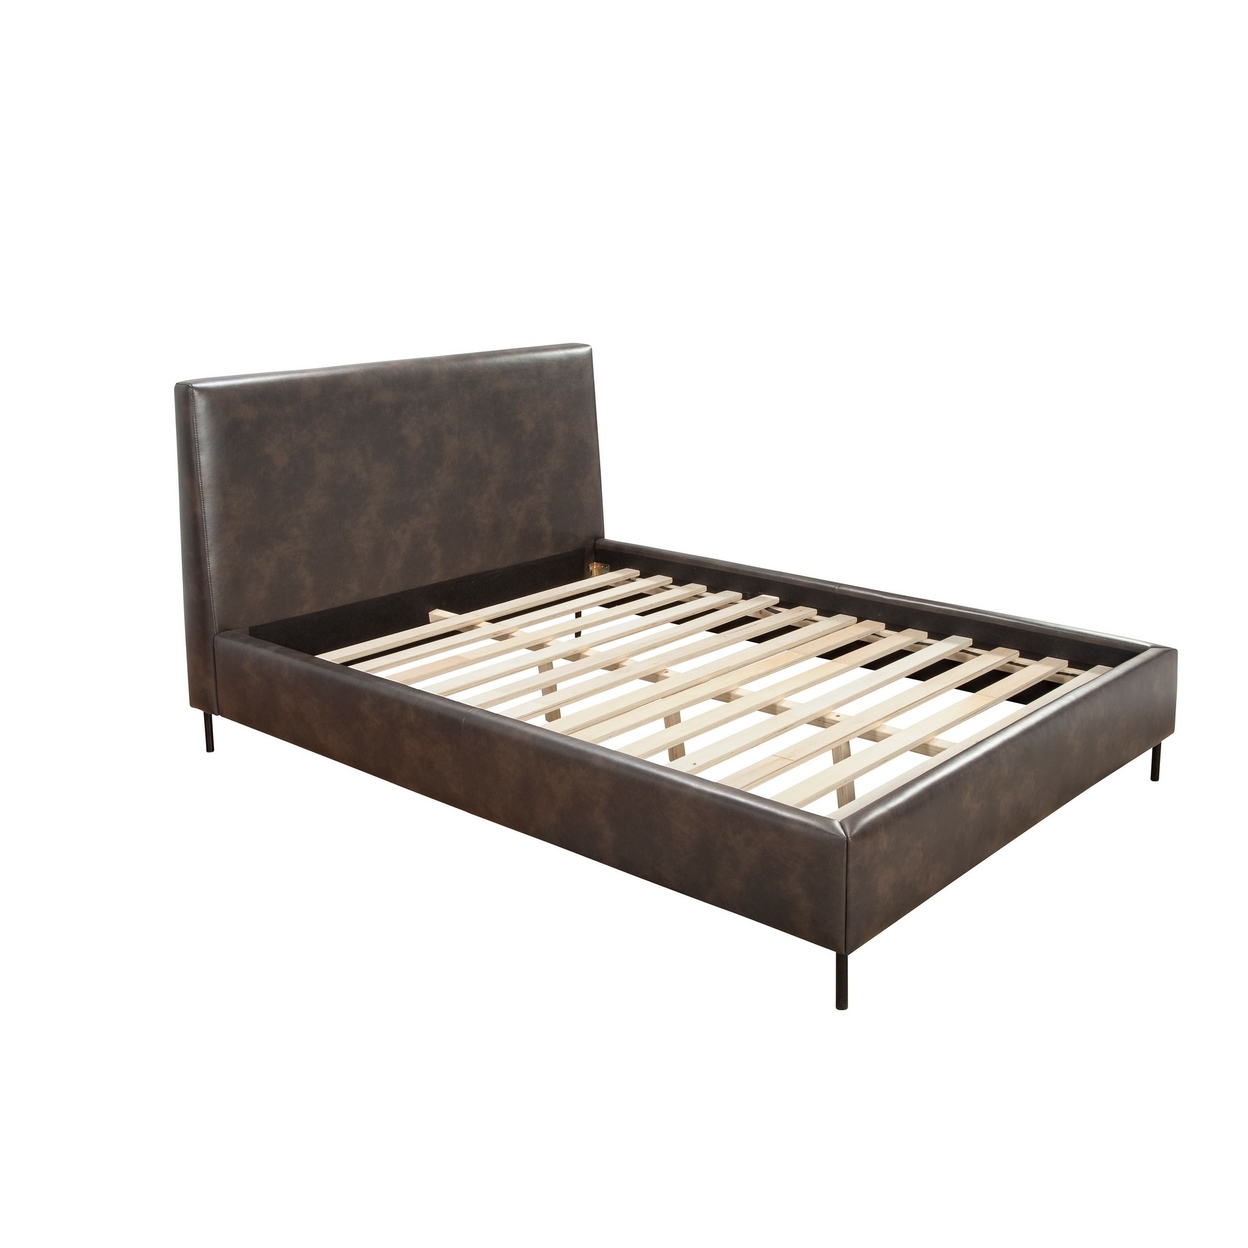 Faux Leather Upholstered Full Bed With Metal Legs, Gray- Saltoro Sherpi